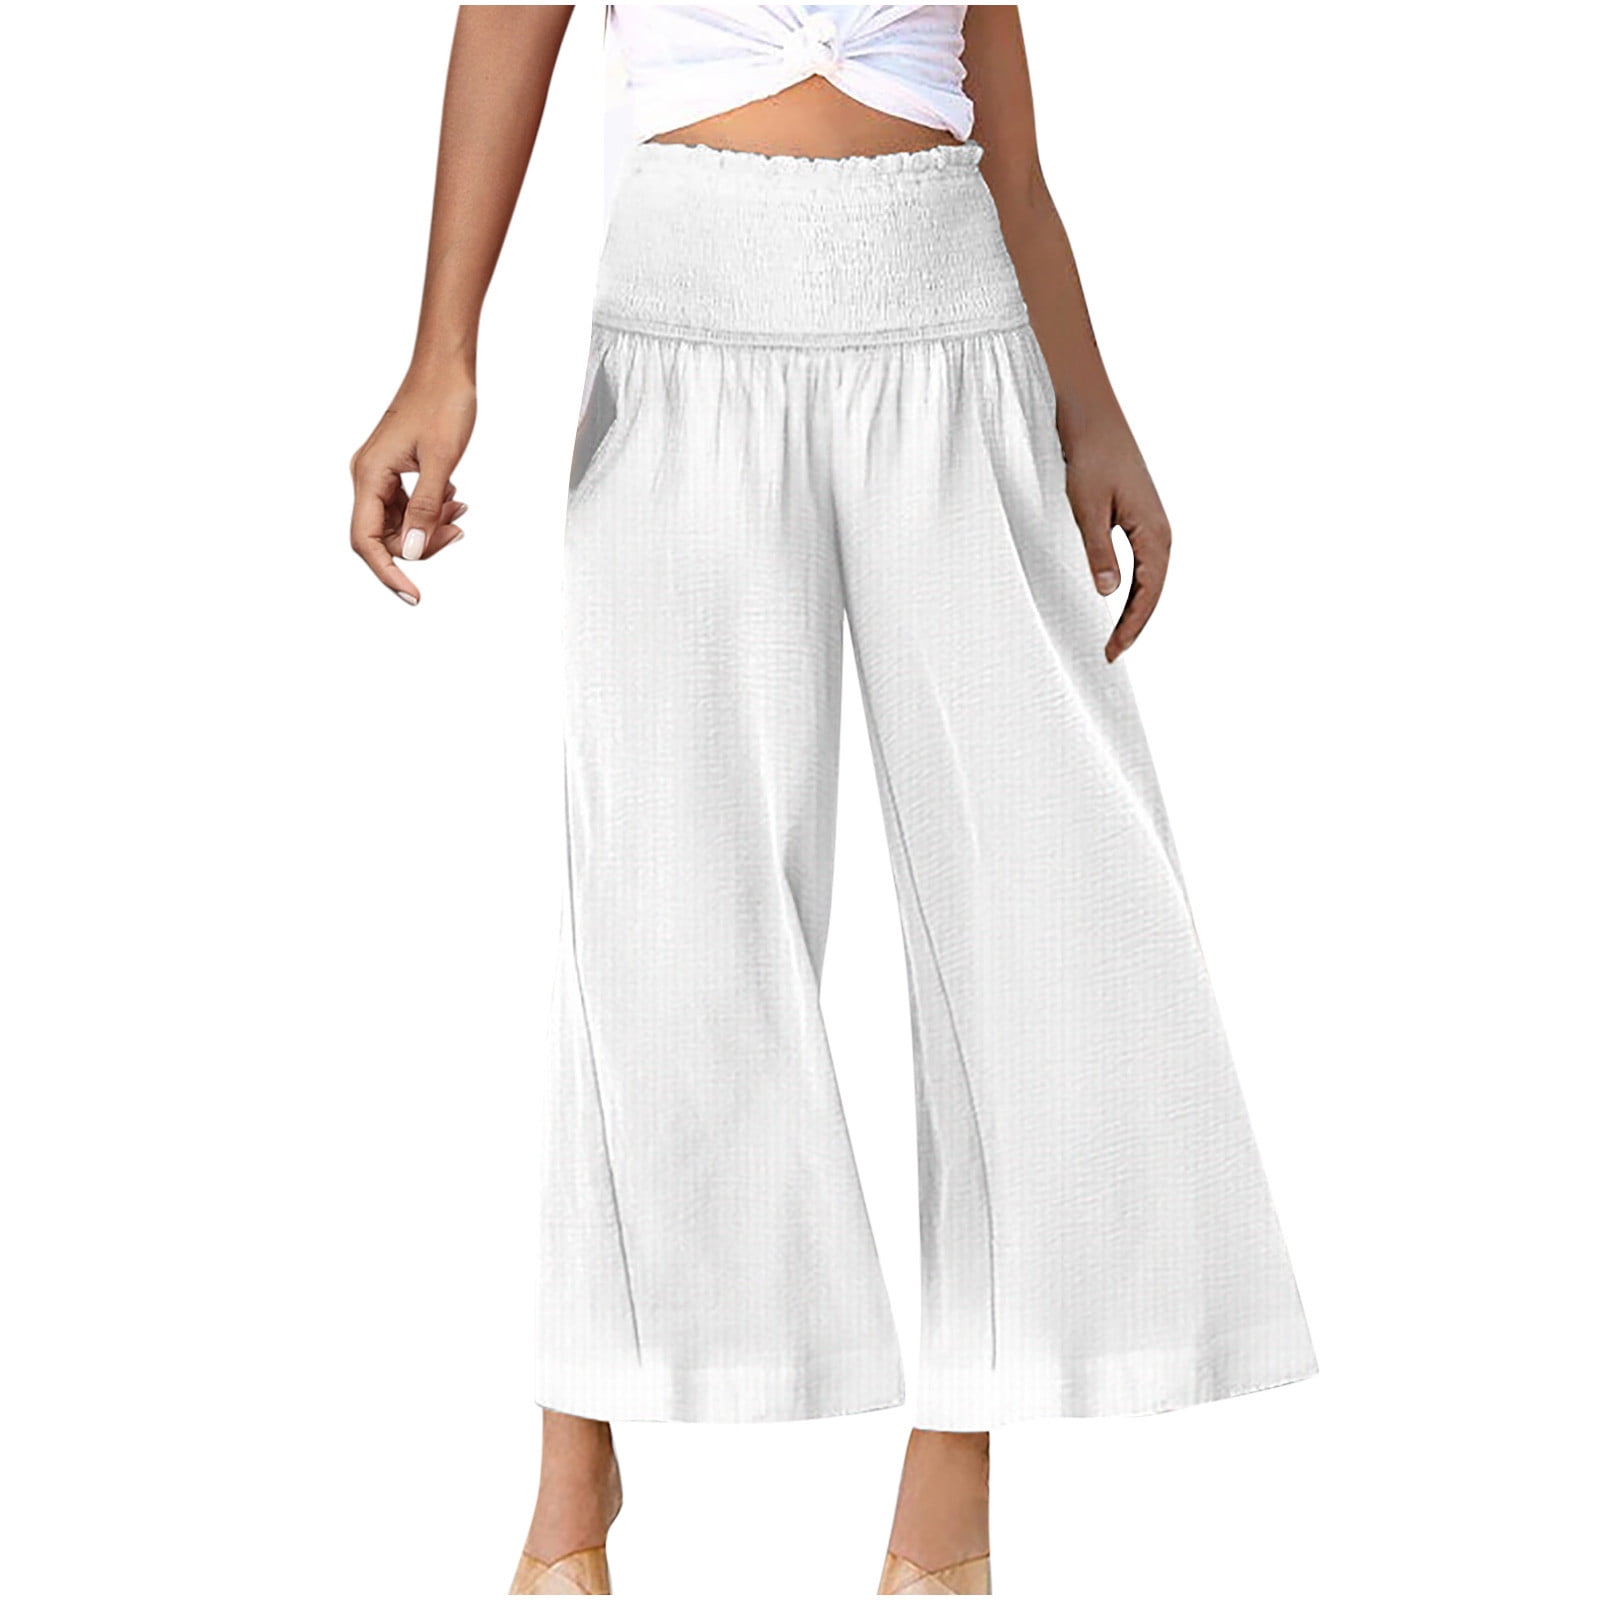 Capri Pants for Women Casual Loose Elastic Waist Cropped Wide Leg Pants  High Elastic Palazzo Trousers with Pockets Capris